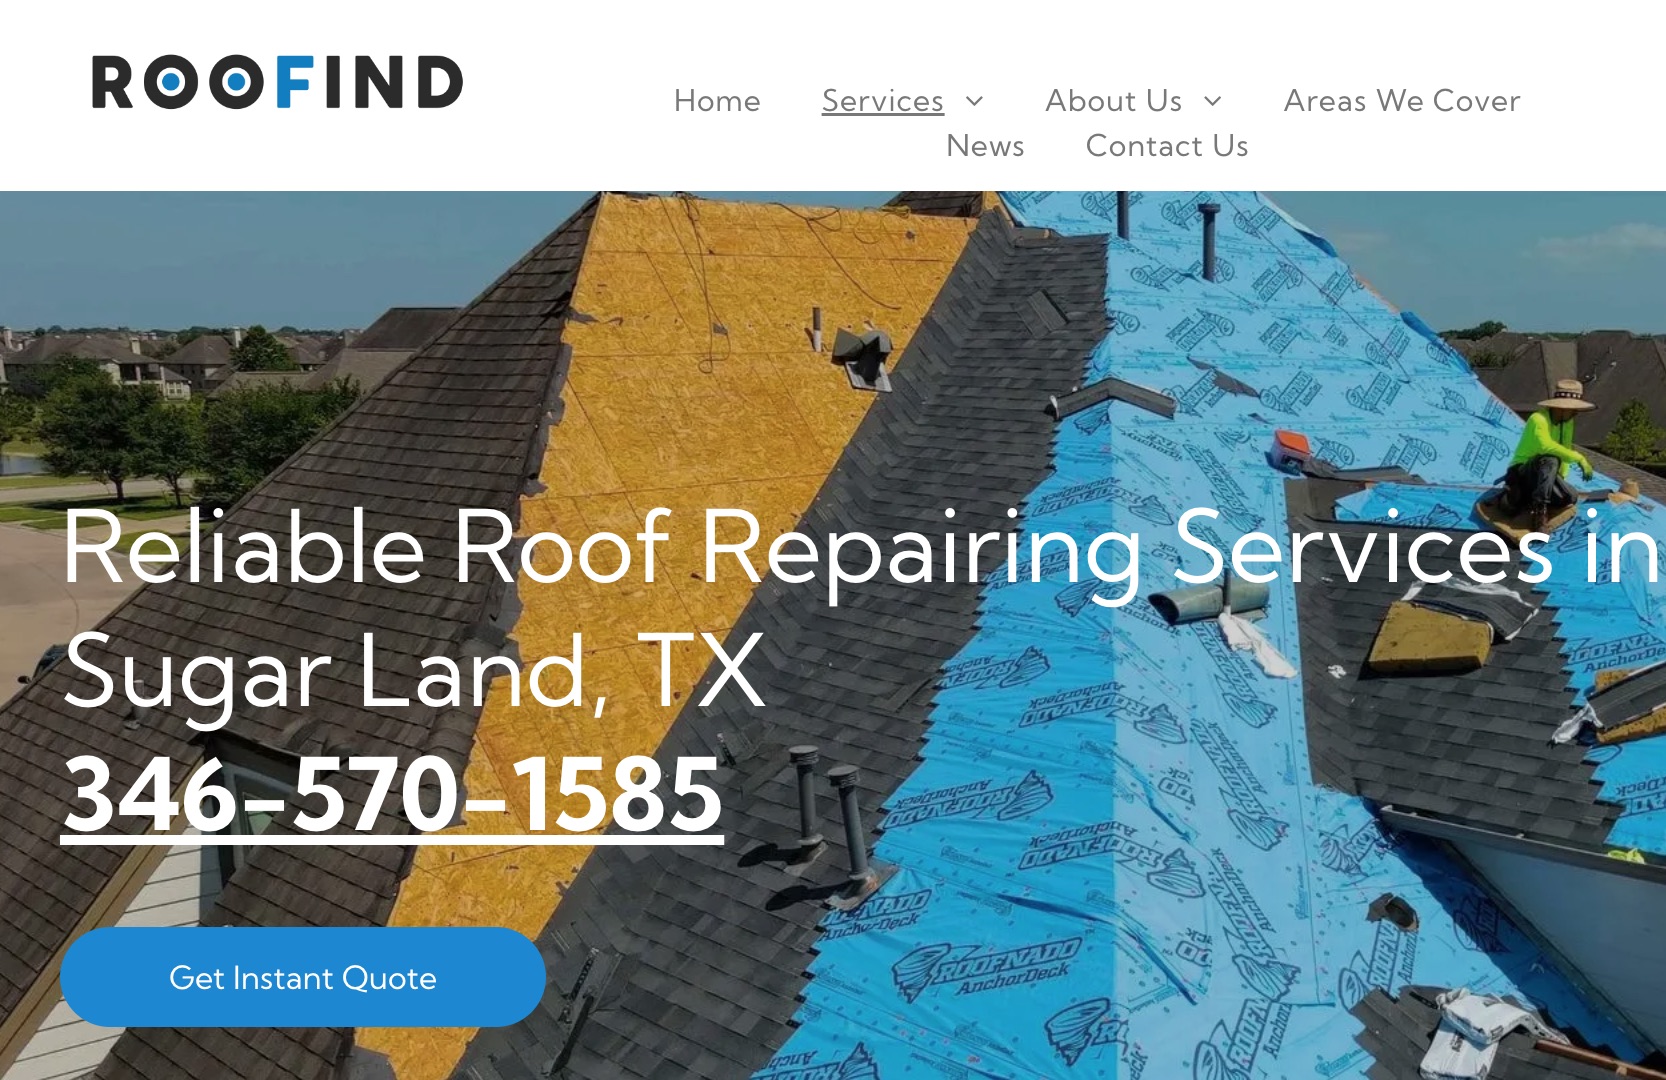 The Roofind Advantage: Houston’s Top Choice for Roofing Excellence